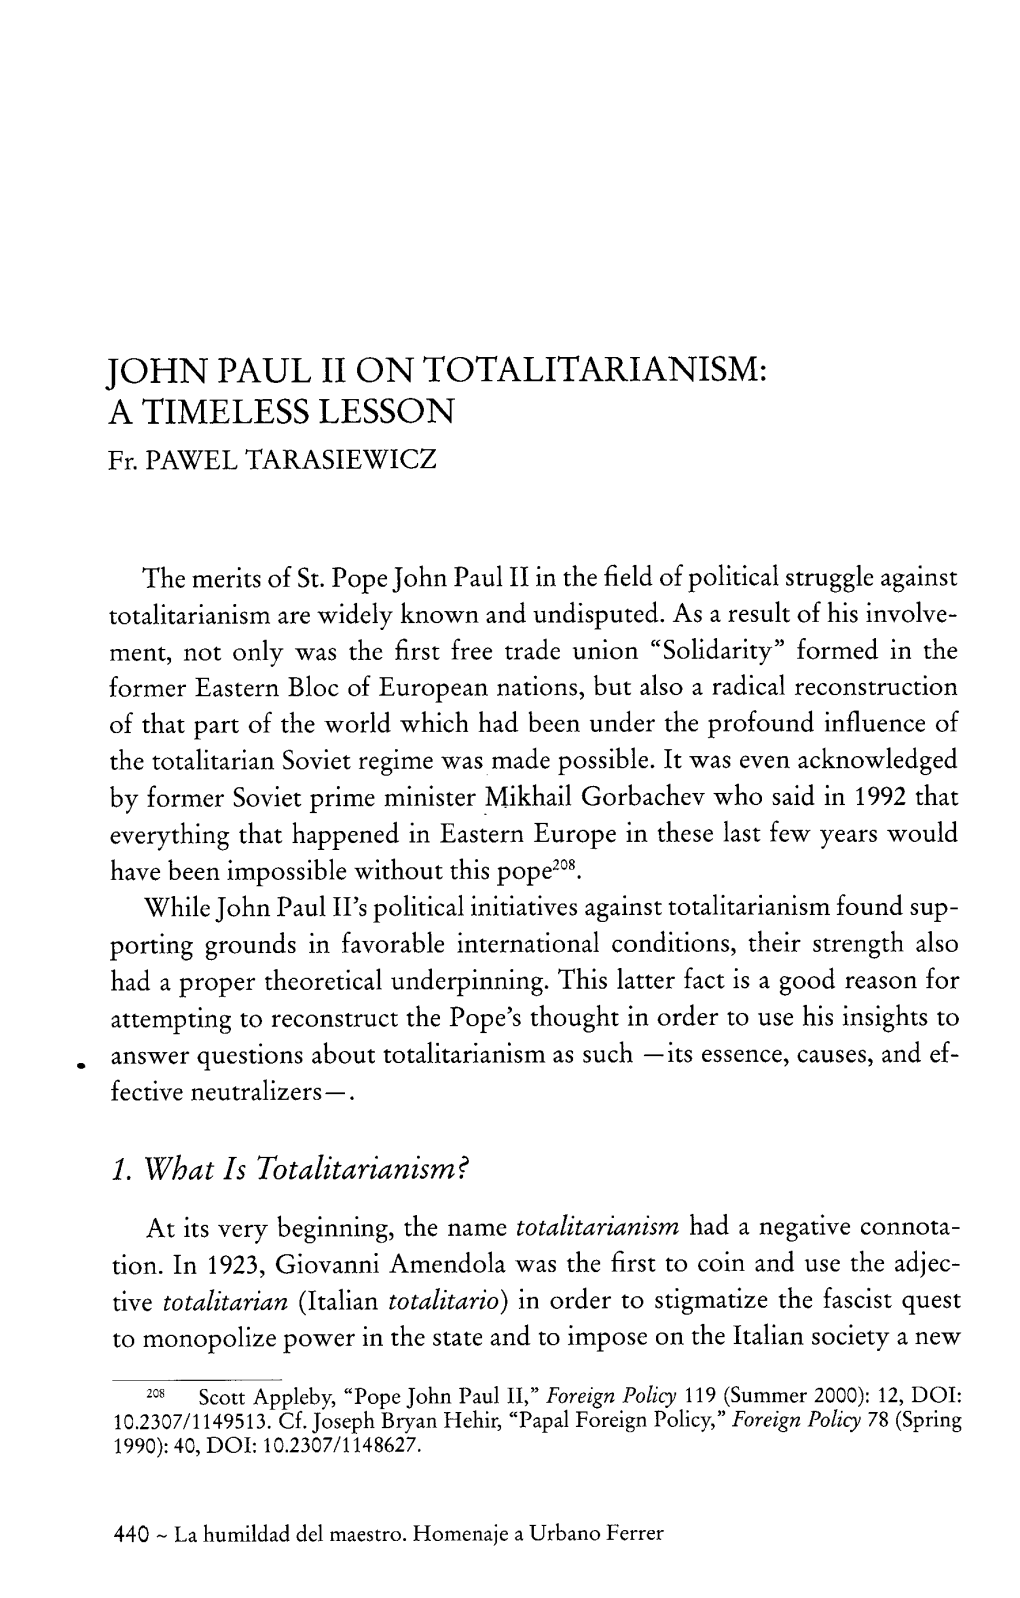 JOHN PAUL II on TOTALITARIANISM: a TIMELESS LESSON Fr